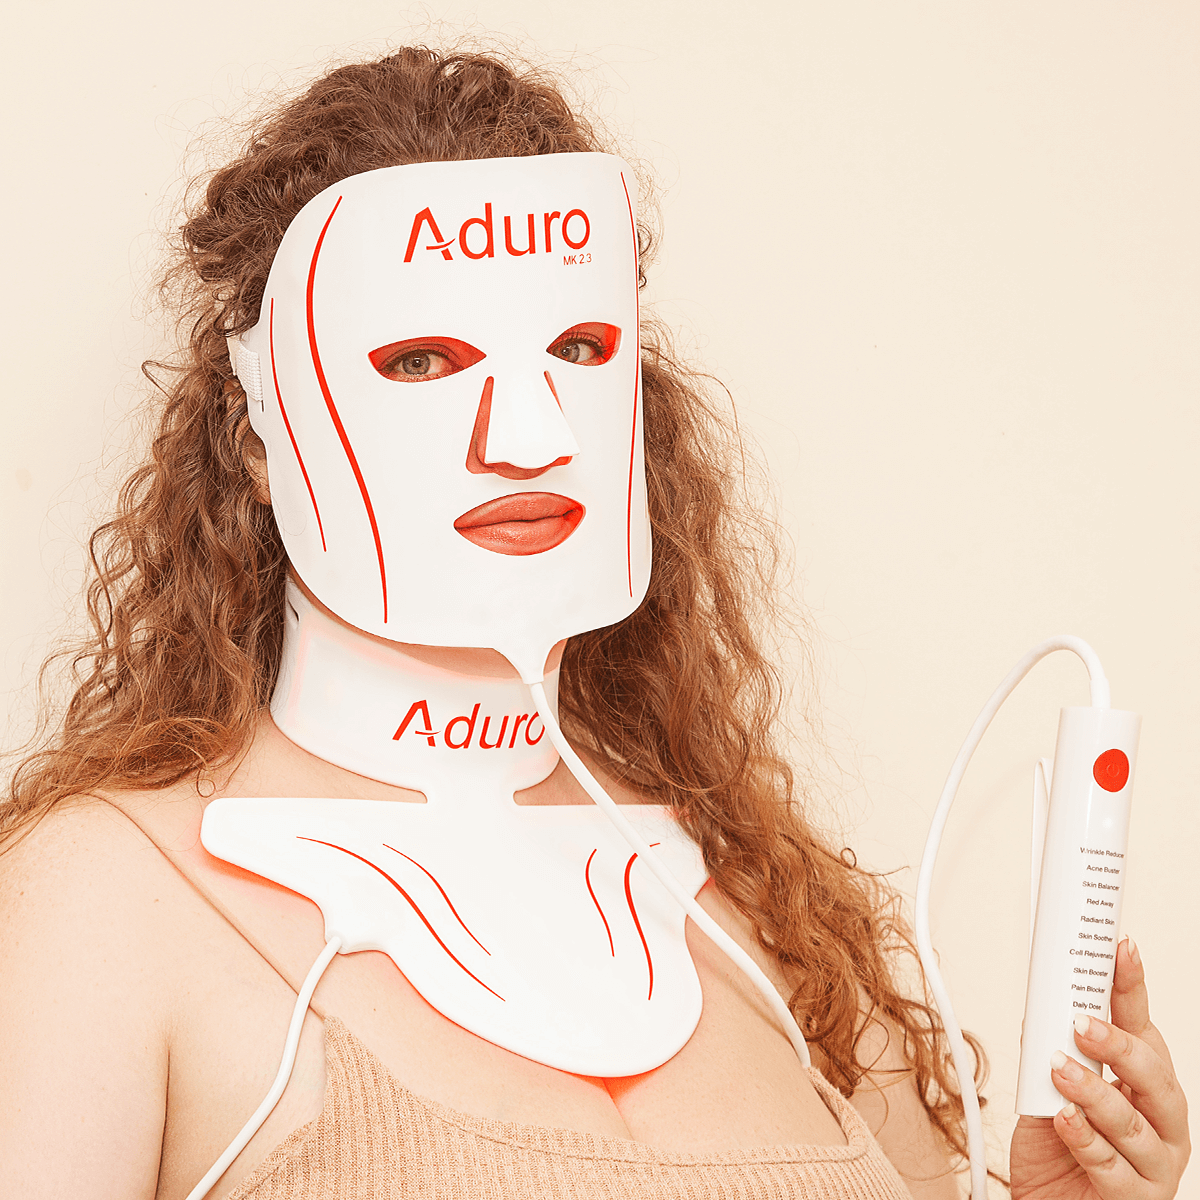 Aduro Facial mask and Neck Mask being used